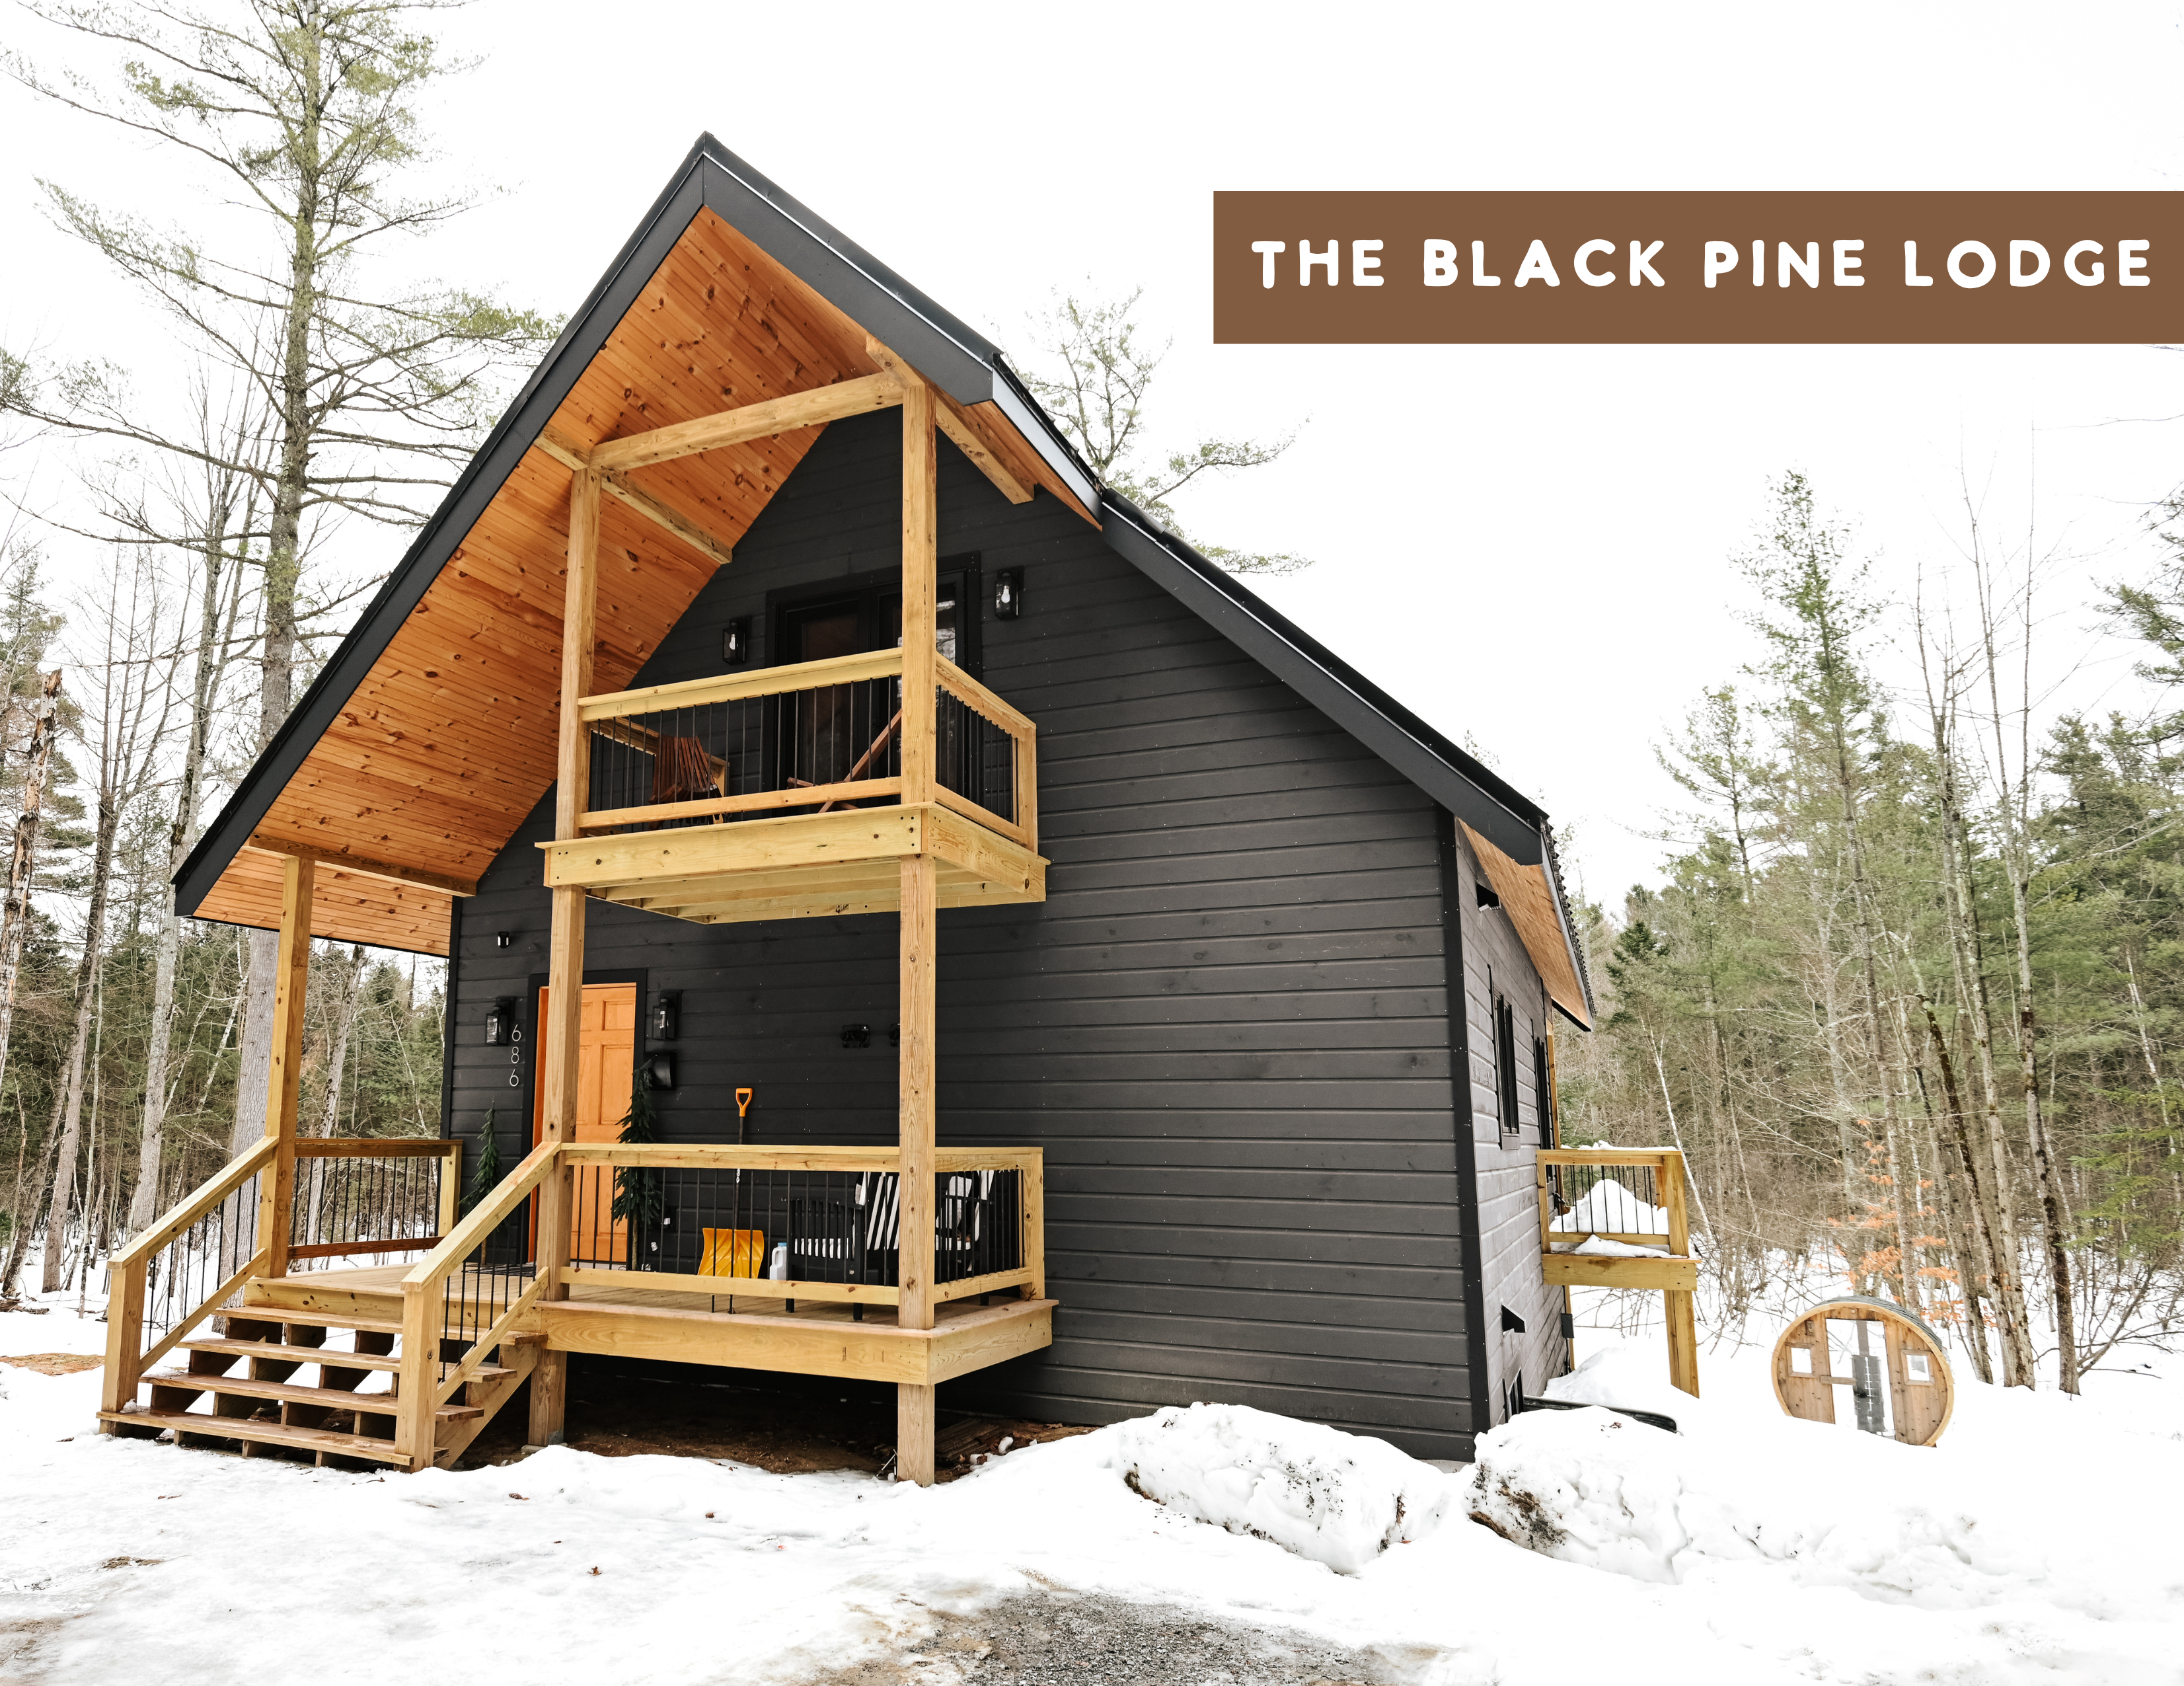 The Black Pine Lodge in Jay, NY | Adirondacks, Upstate New York | Experience Upstate Feature by Compas Life / Upstate of Mind